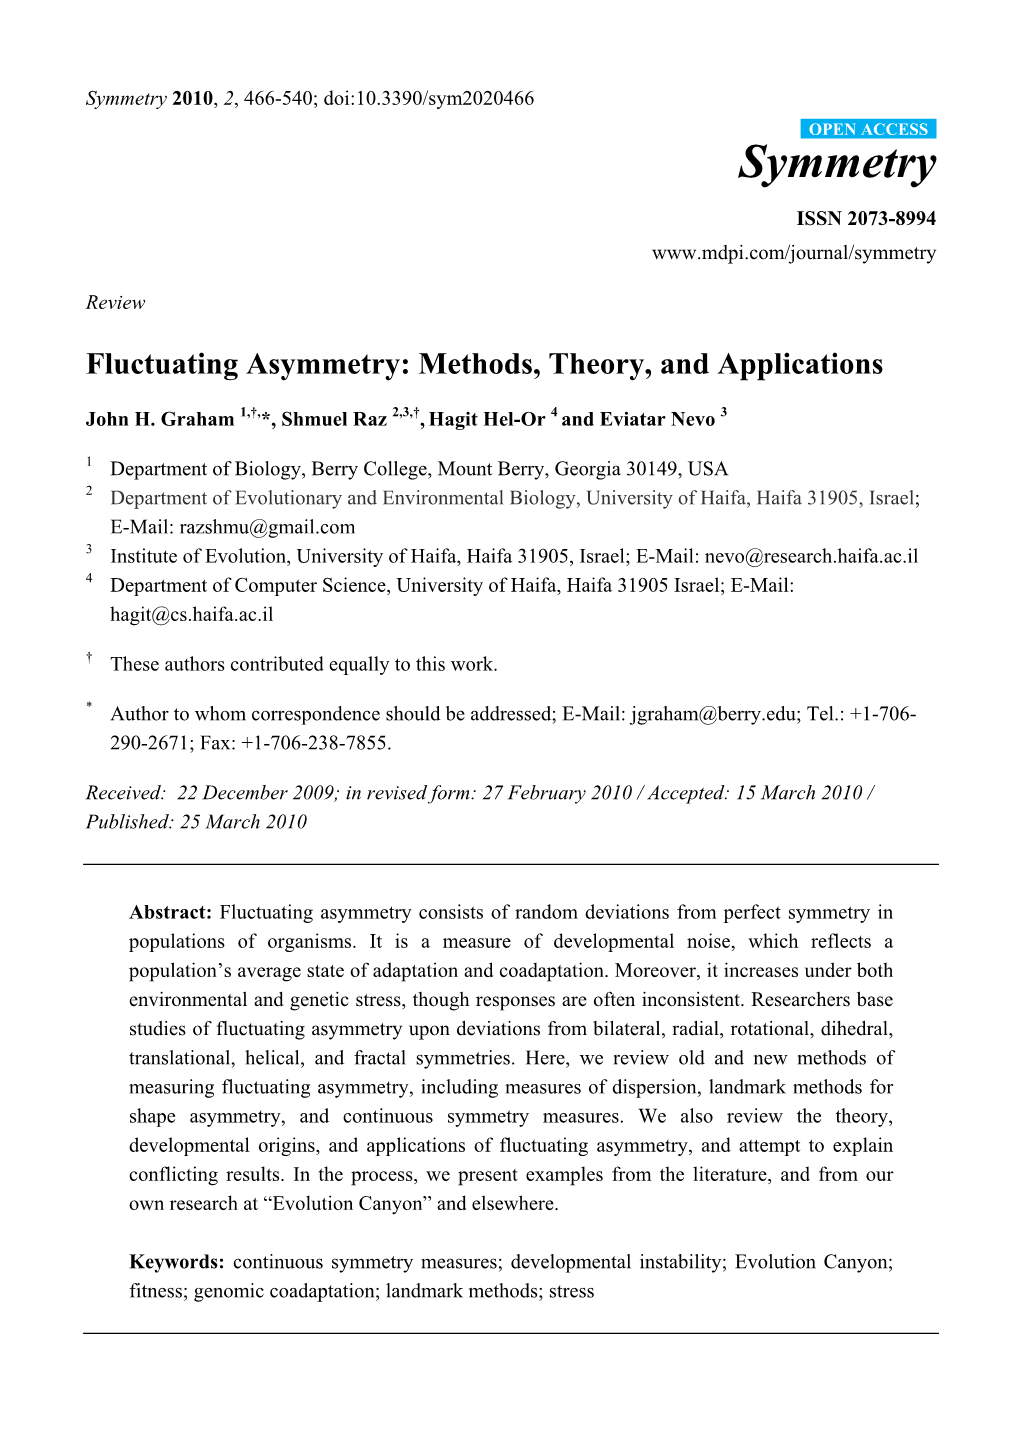 Fluctuating Asymmetry: Methods, Theory, and Applications